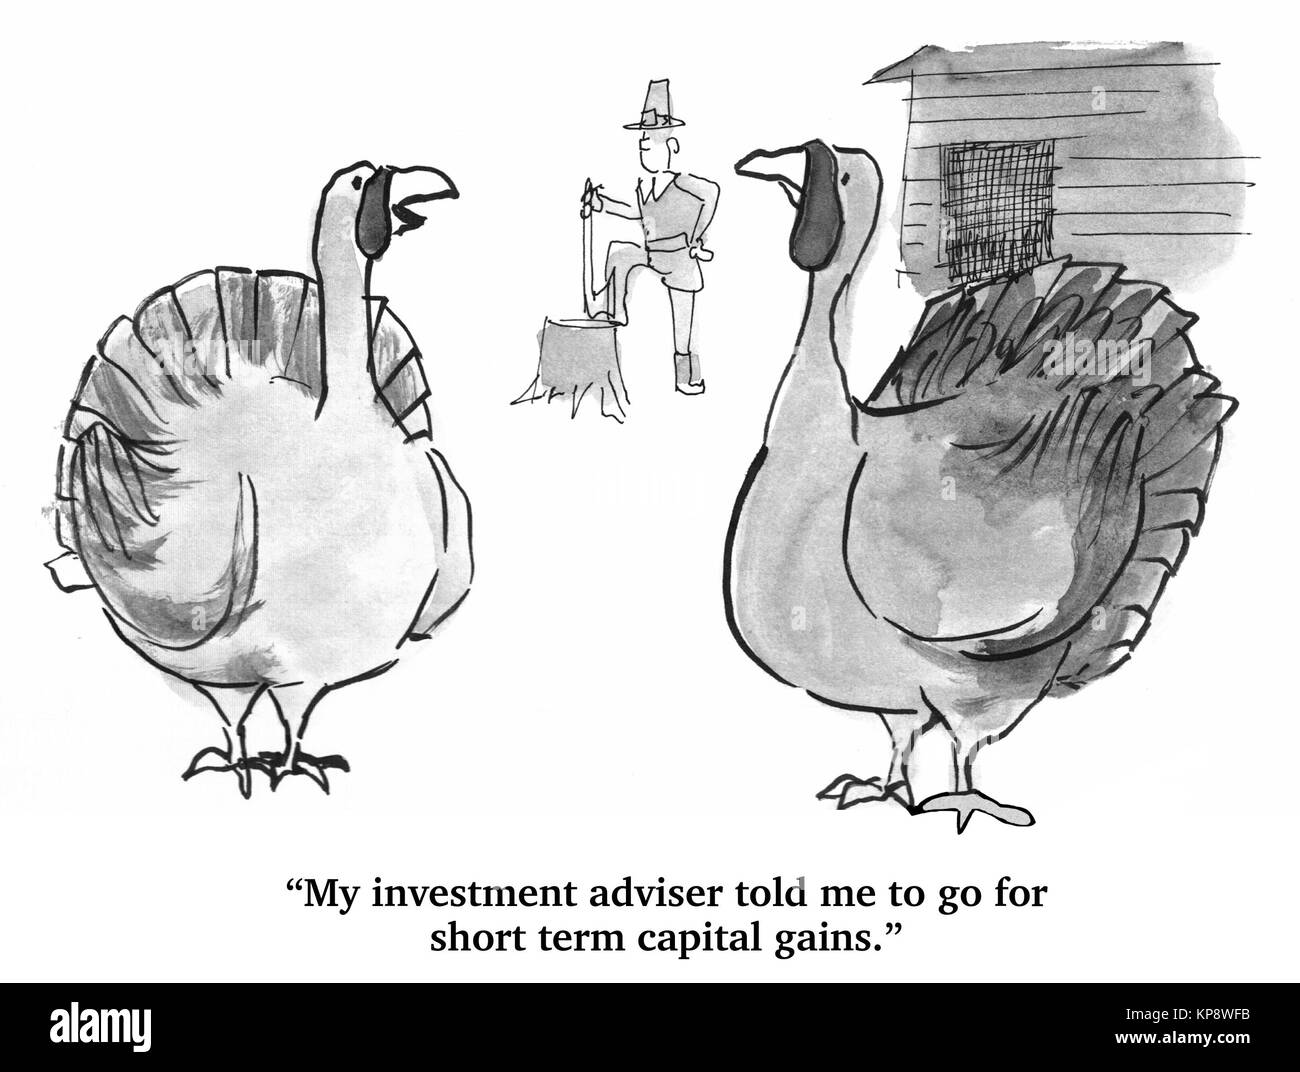 Turkey, with pilgrim in background, says that his investment advisor suggests short term funds. Stock Photo